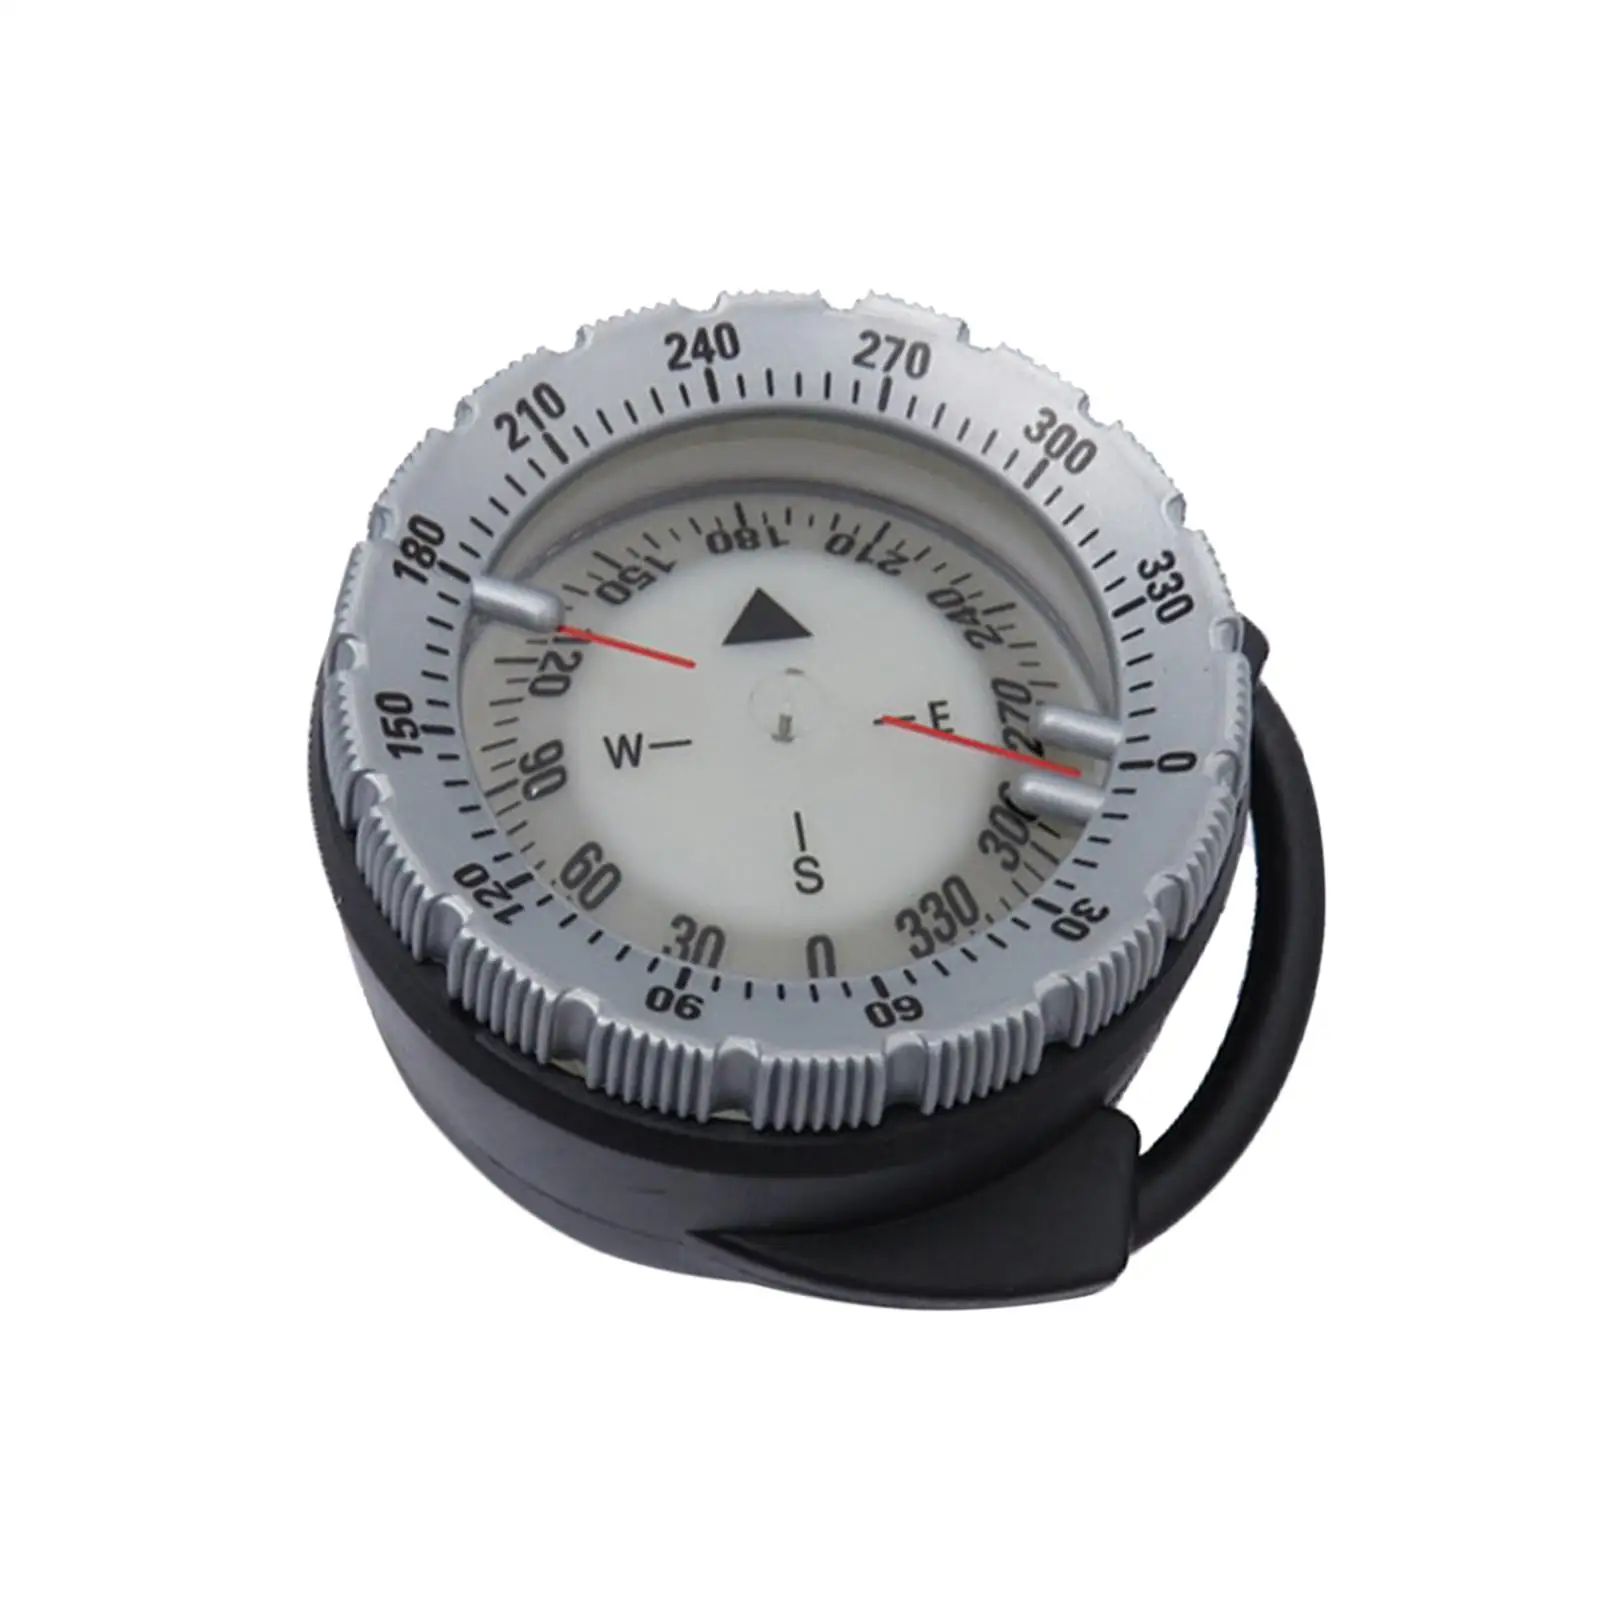 Camping Survival Compass Luminous Compass for Outdoor Hiking Orienteering